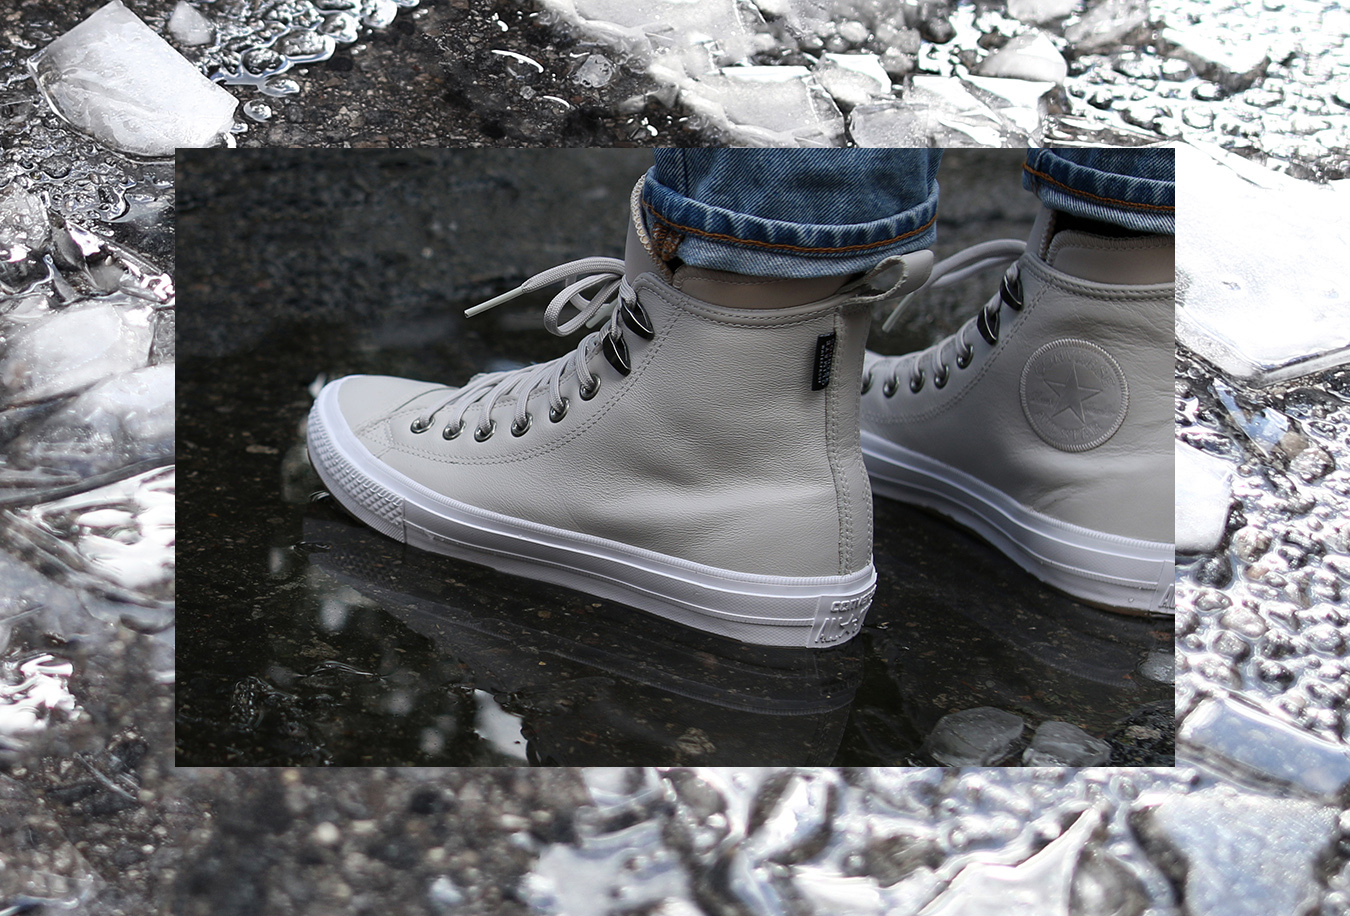 converse counter climate boots